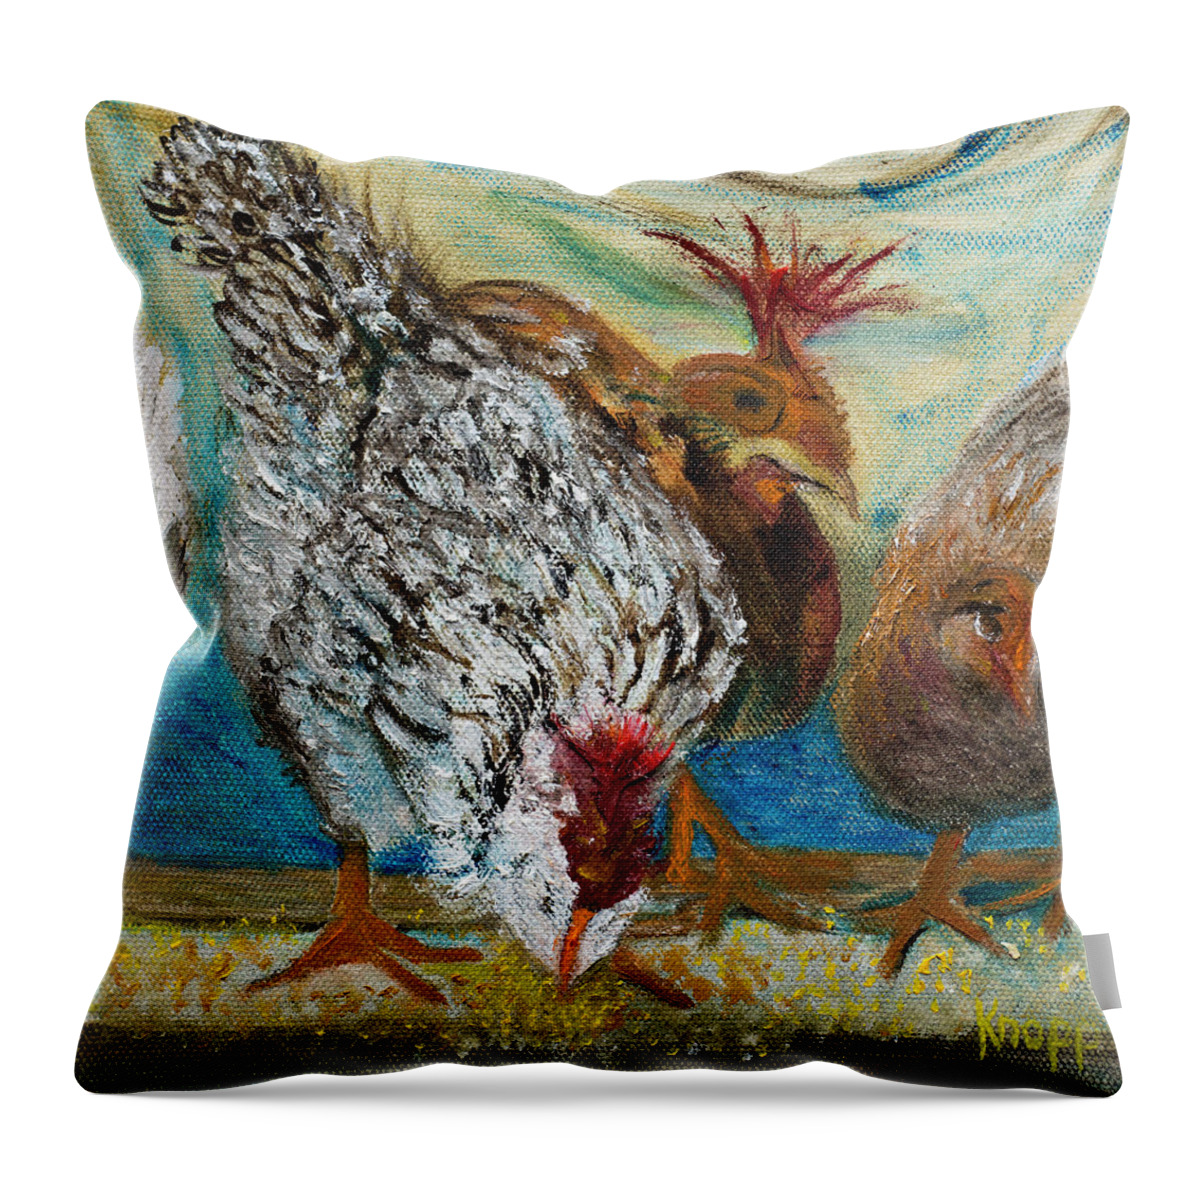 Africian Chickens Throw Pillow featuring the painting Crazy Chickens by Kathy Knopp